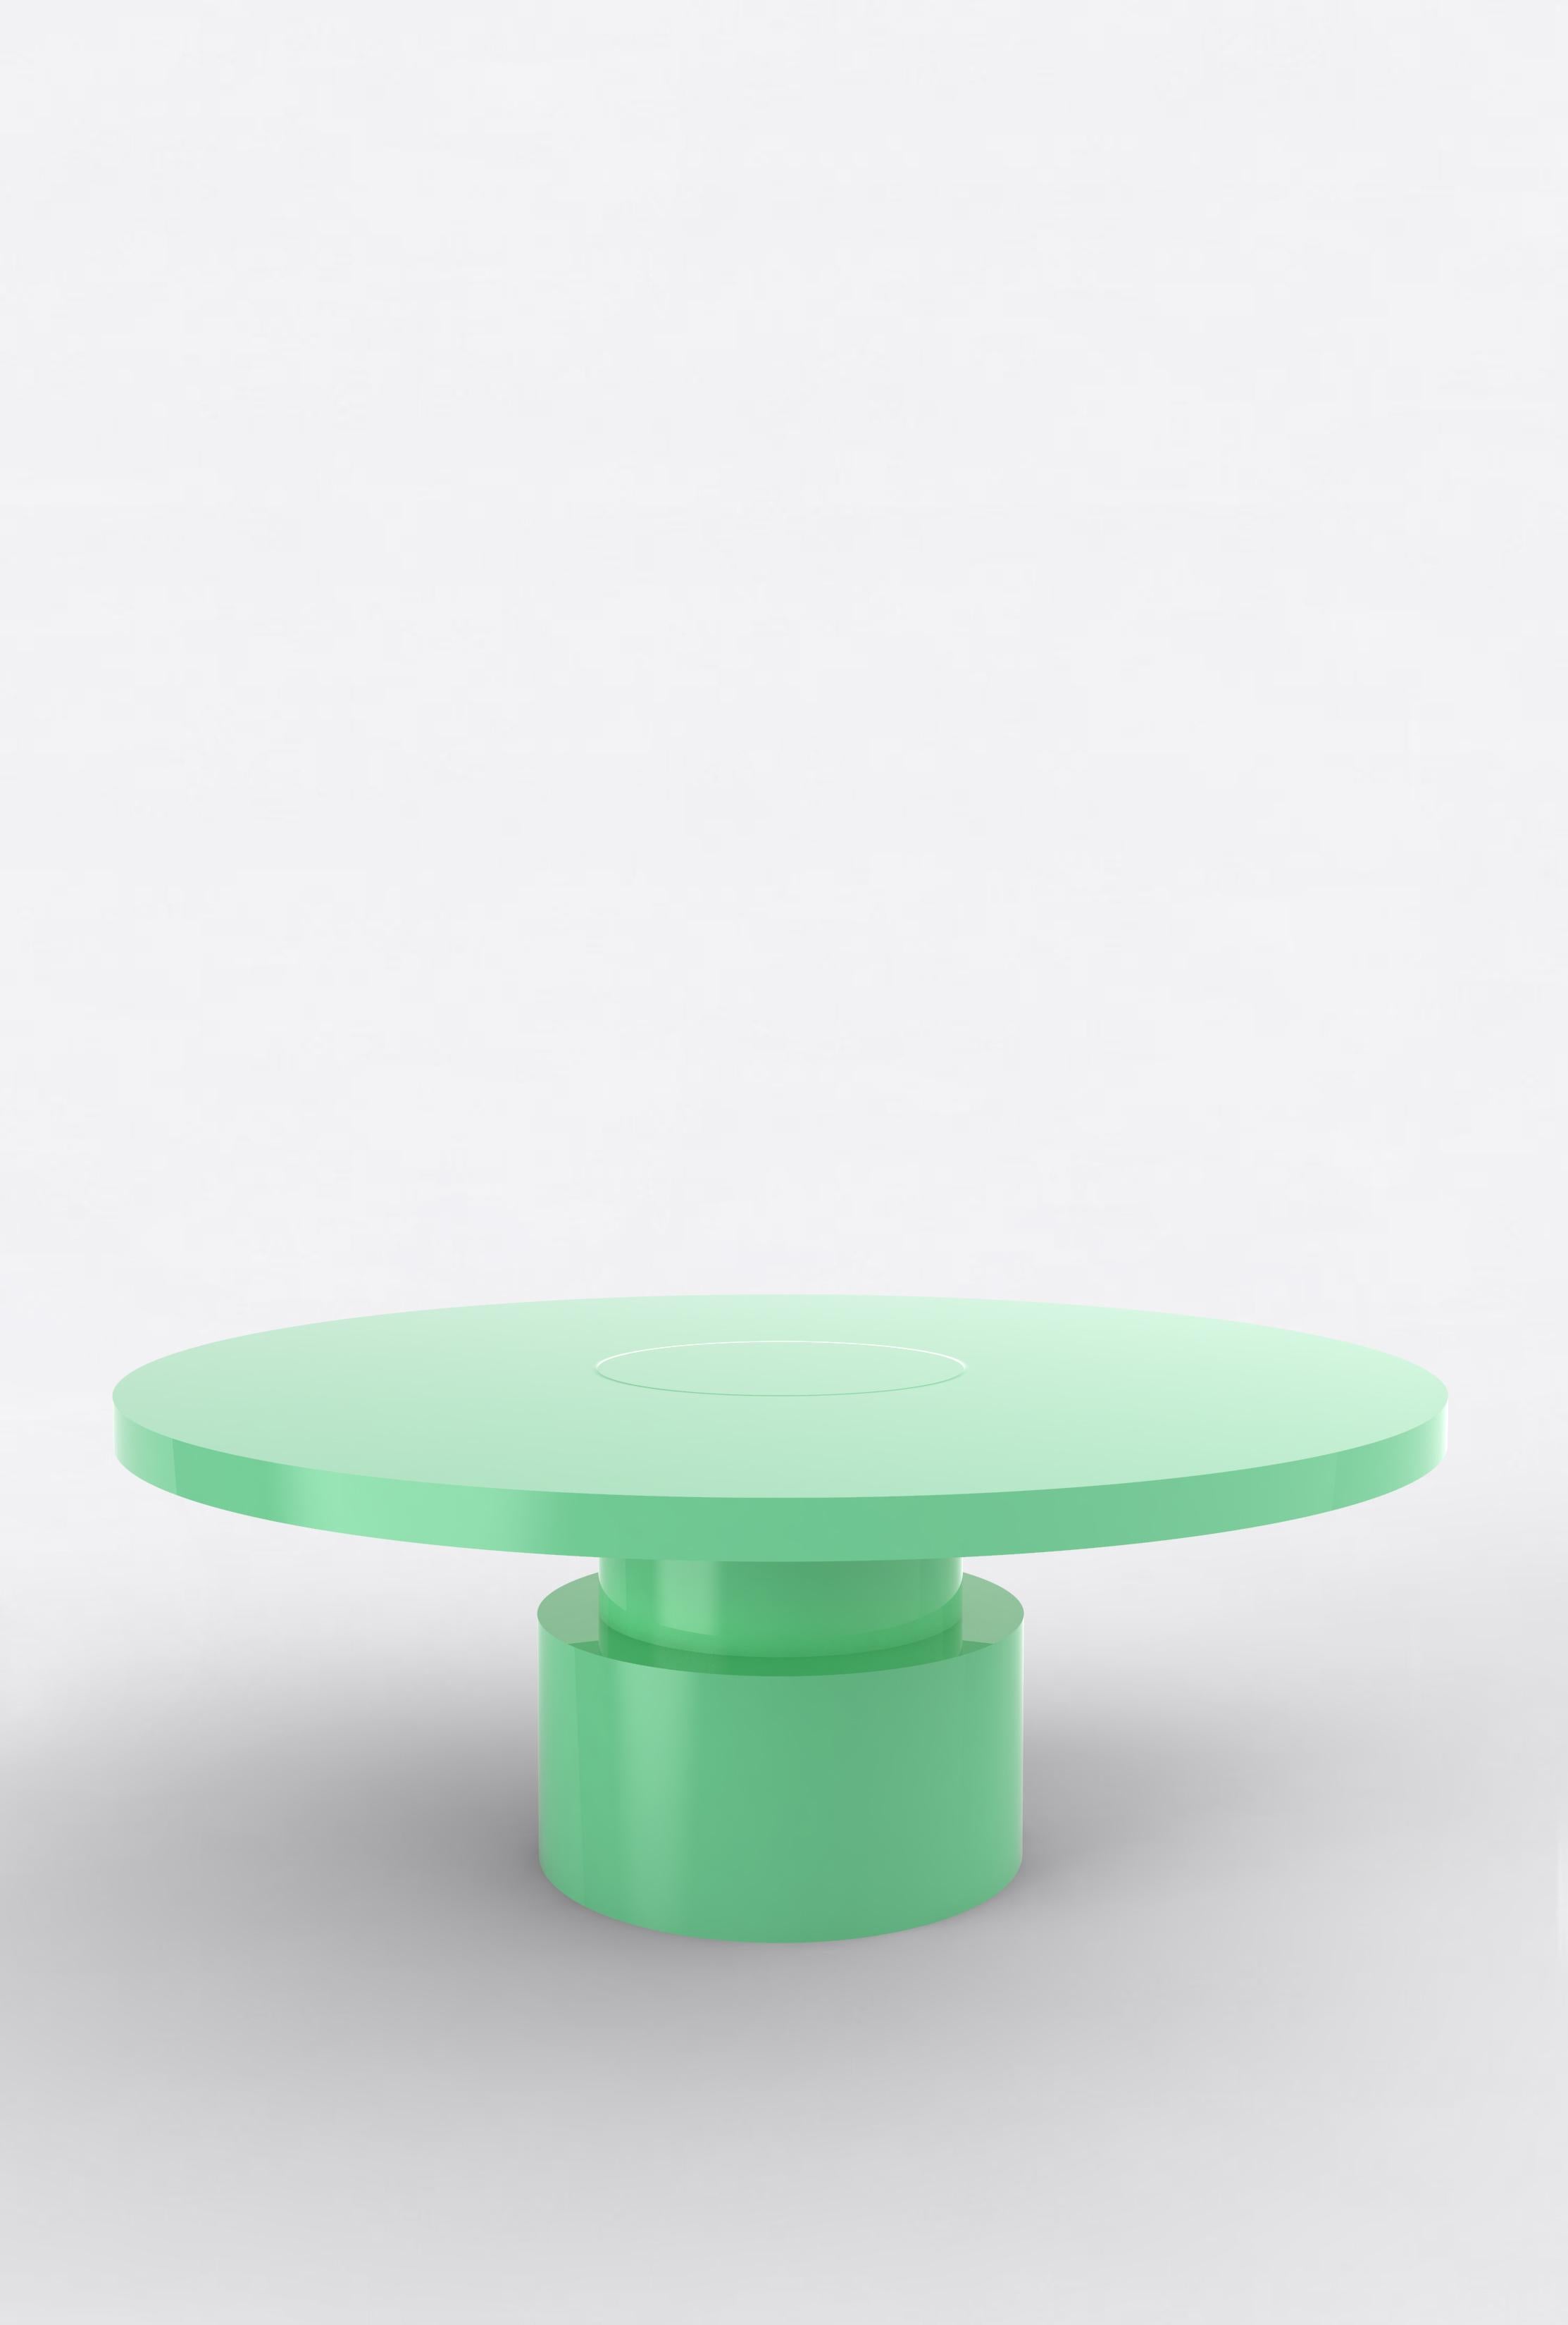 Orphan Work 100C Coffee Table, 2020
Shown painted.
Available with painted top and base.
Colors offered: pink, mint, yellow, blue and brown.
Measures: 42” diameter x 16” height
Dimensions available:
42